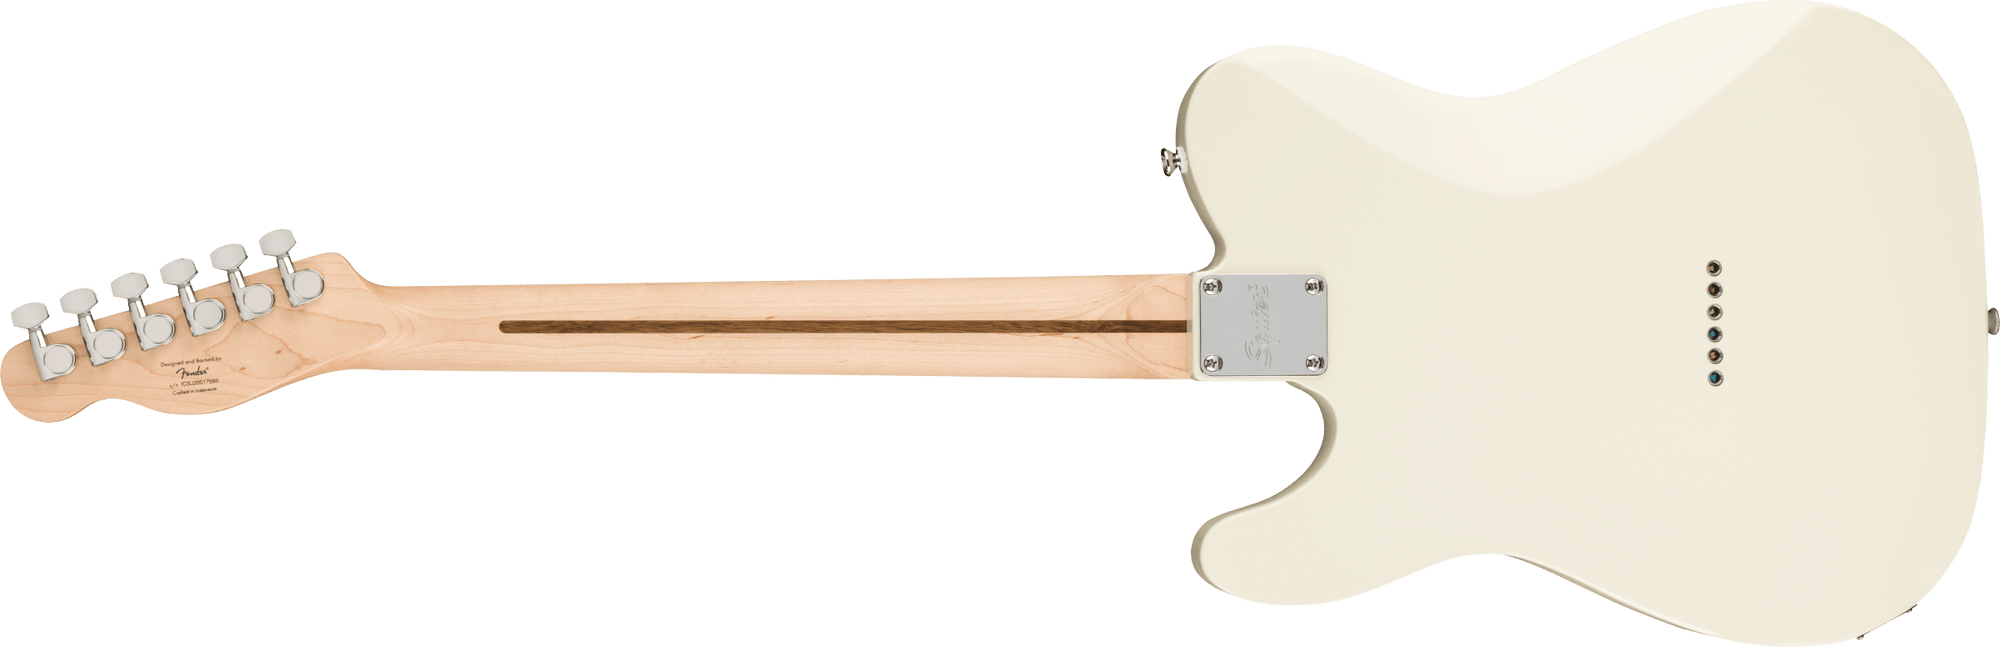 Affinity Series Telecaster, Olympic White, Laurel Fingerboard, White Pickguard